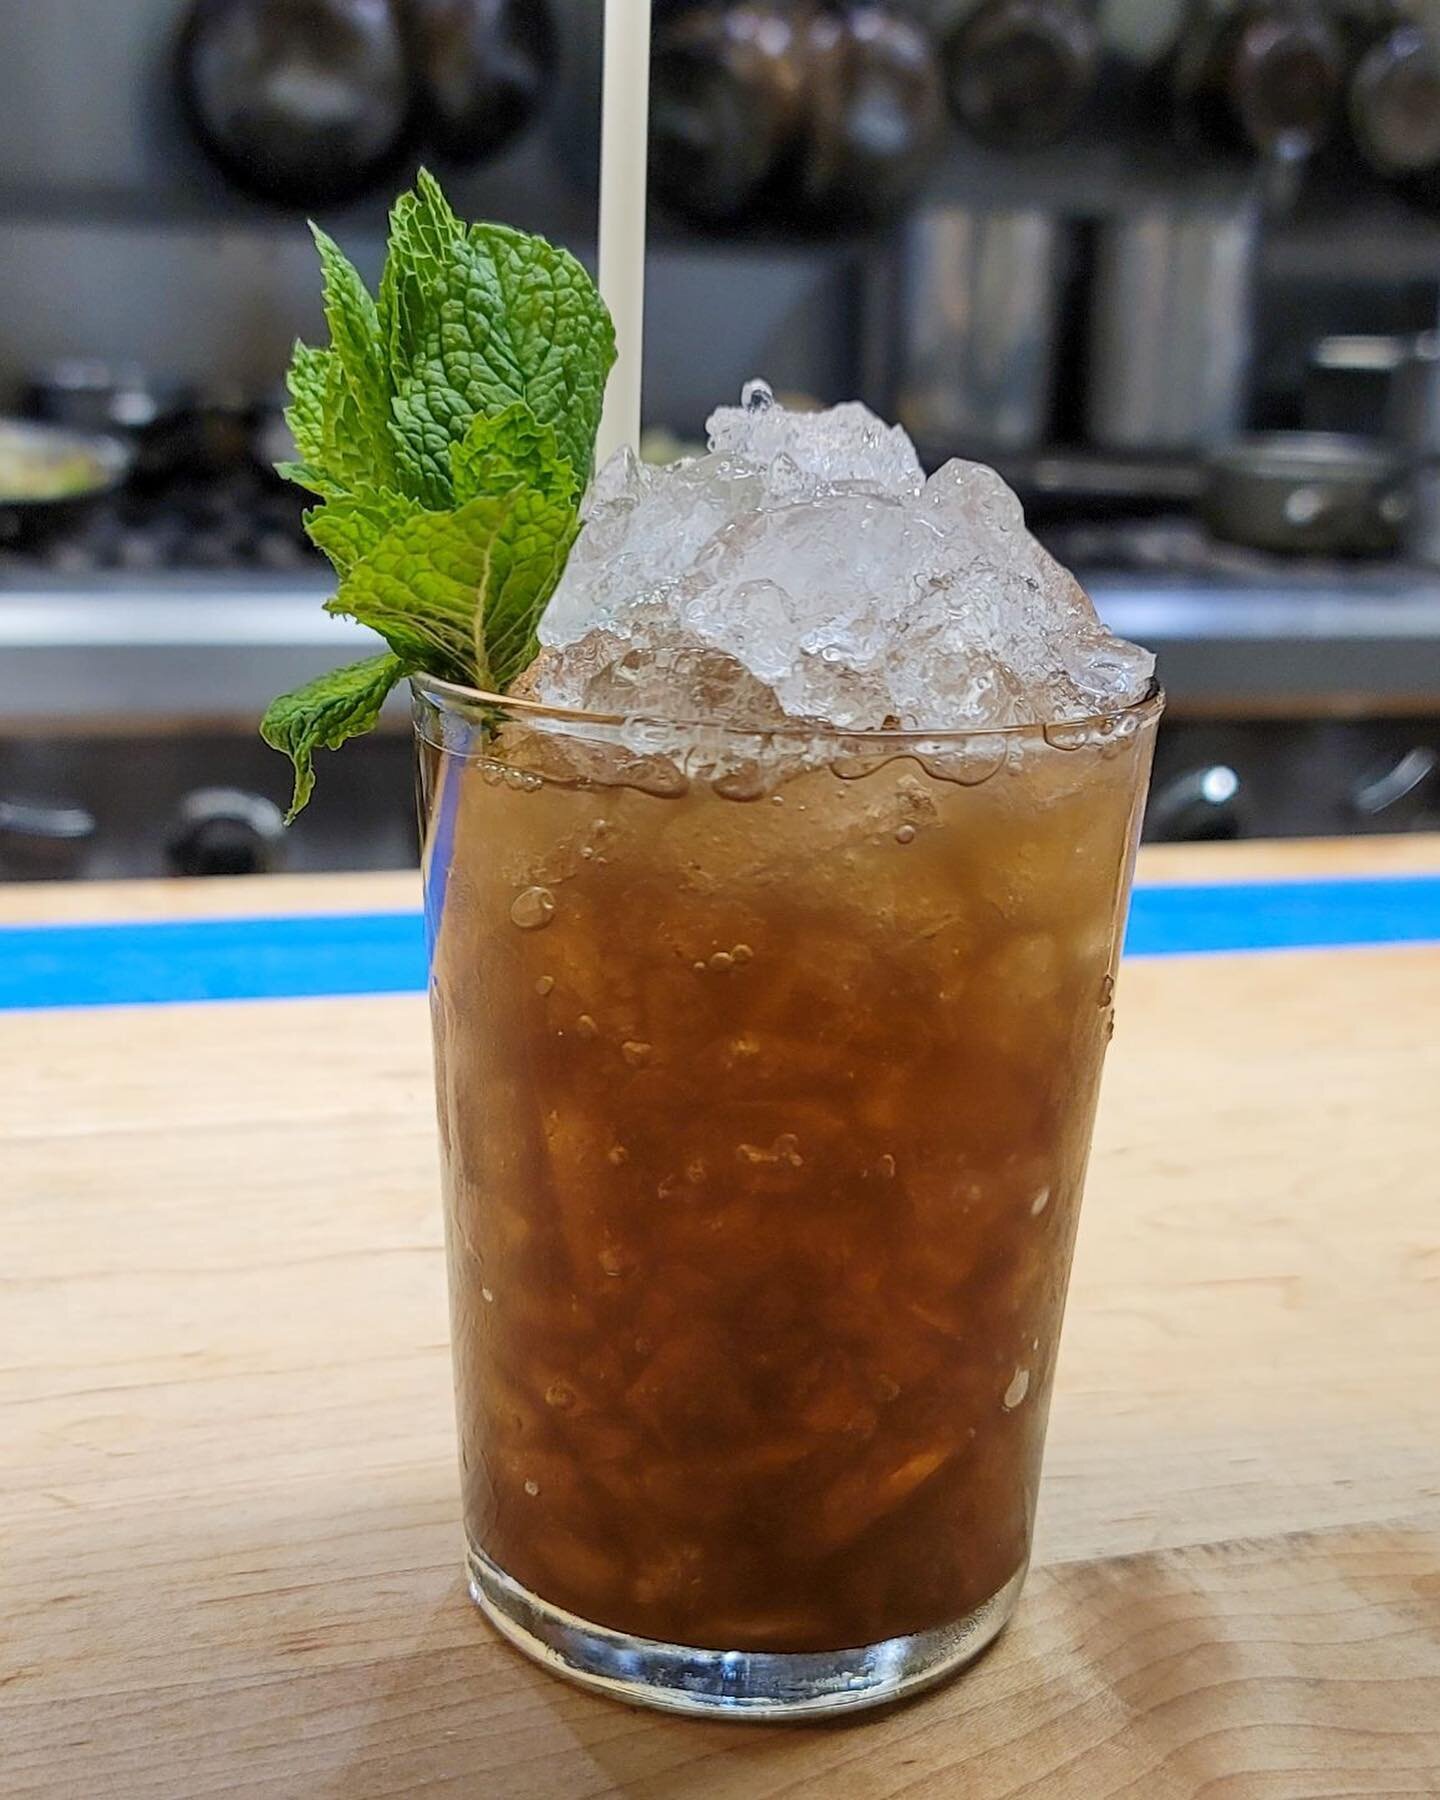 We decided our mint julep is too good to say good-bye to.

Come enjoy this regional and seasonal classic after the horse race this weekend.

It&rsquo;s made with high-proof bourbon, mint syrup, and crushed ice.

Reserve link in bio, or hit the Reserv